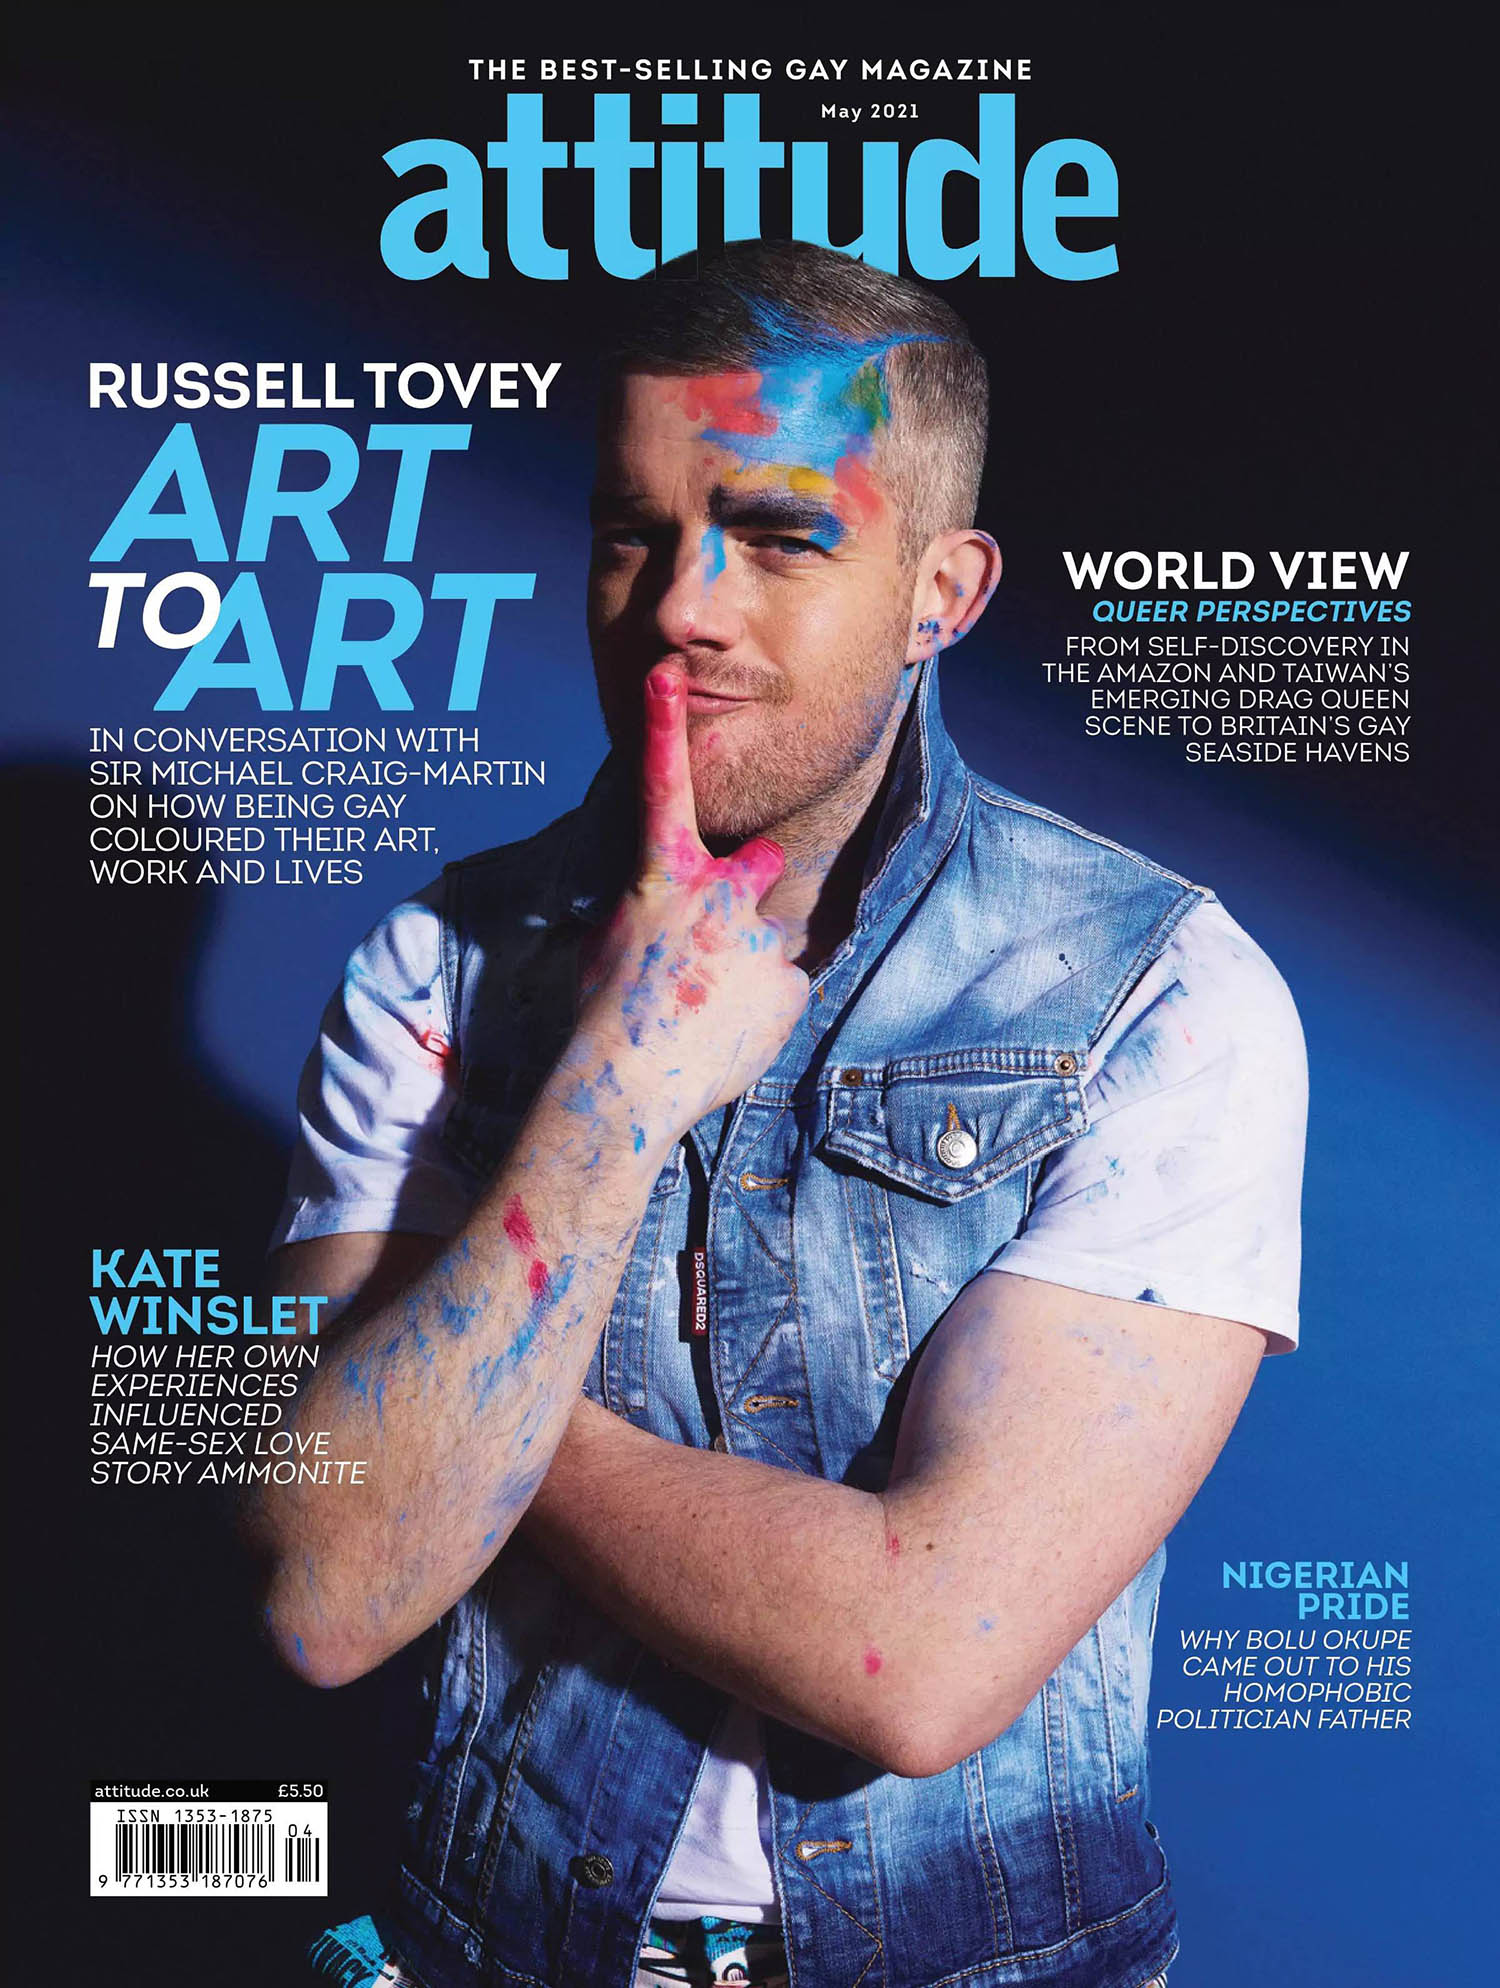 Russell Tovey covers Attitude Magazine May 2021 by Mark Cant